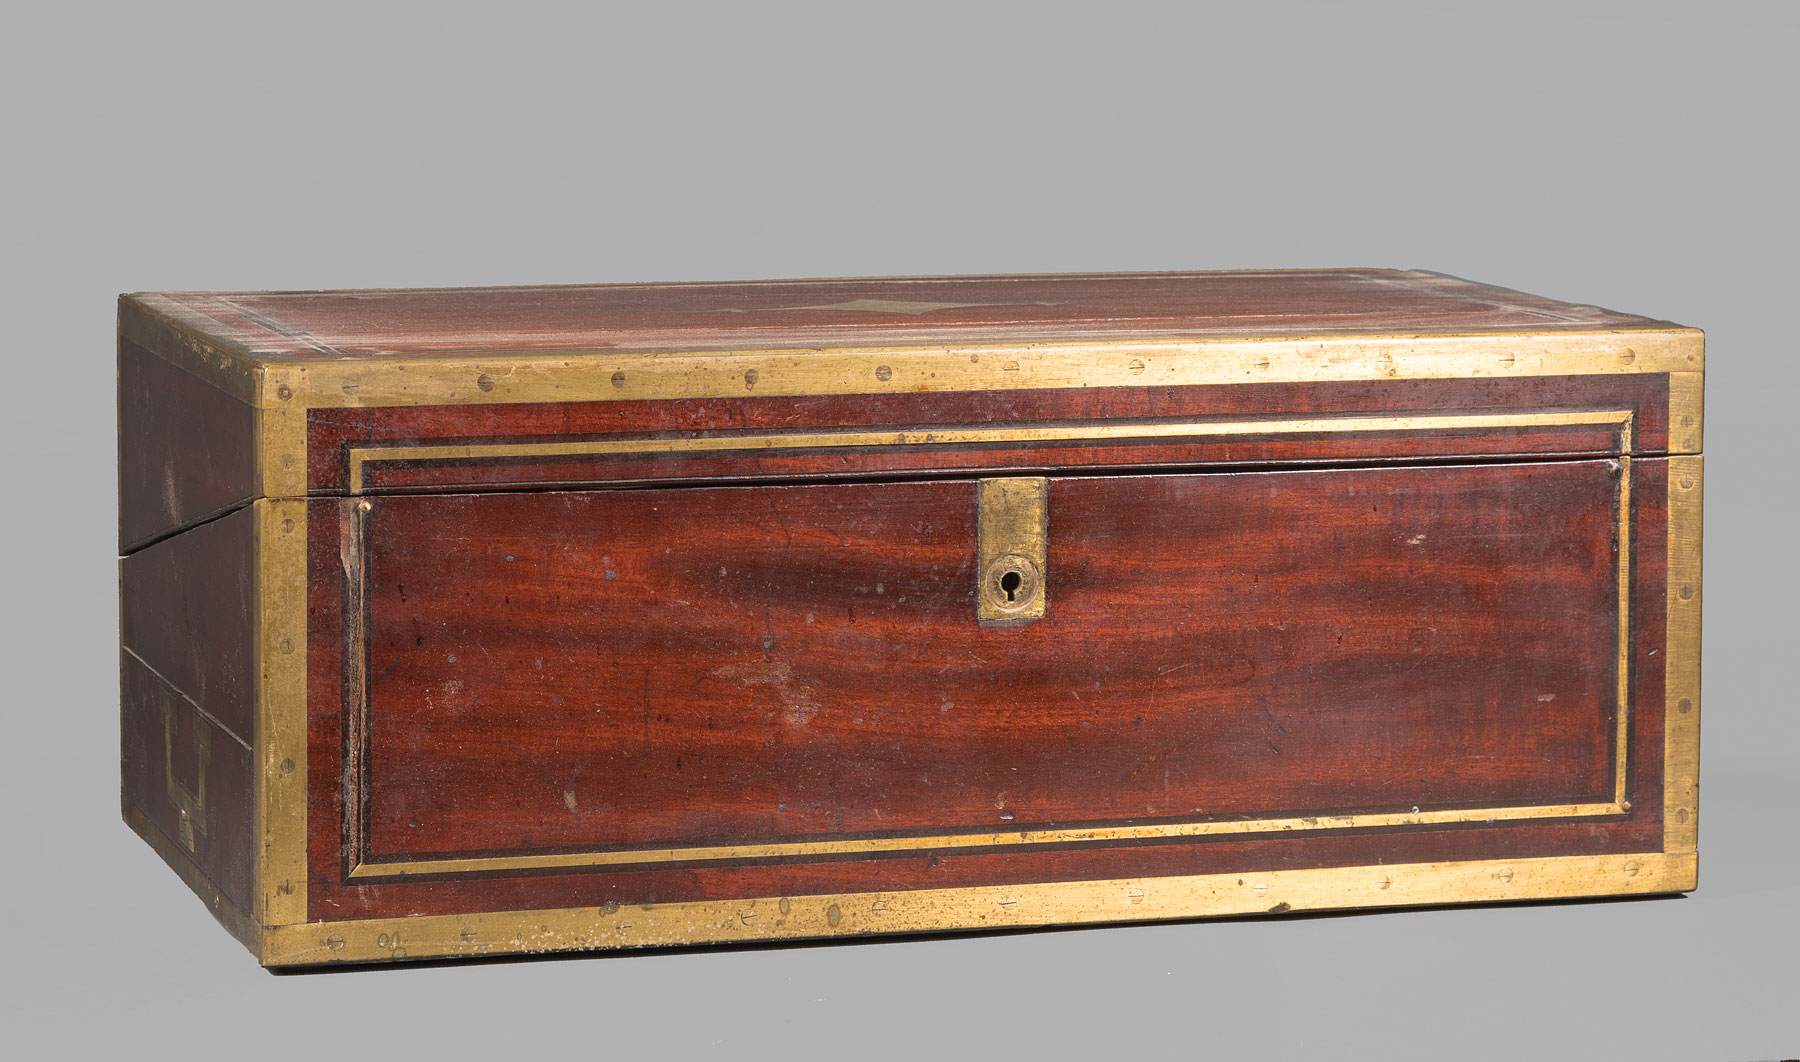 Regency Brass-Bound Mahogany Lap Desk , early 19th c., lid with decorative cartouche, fitted